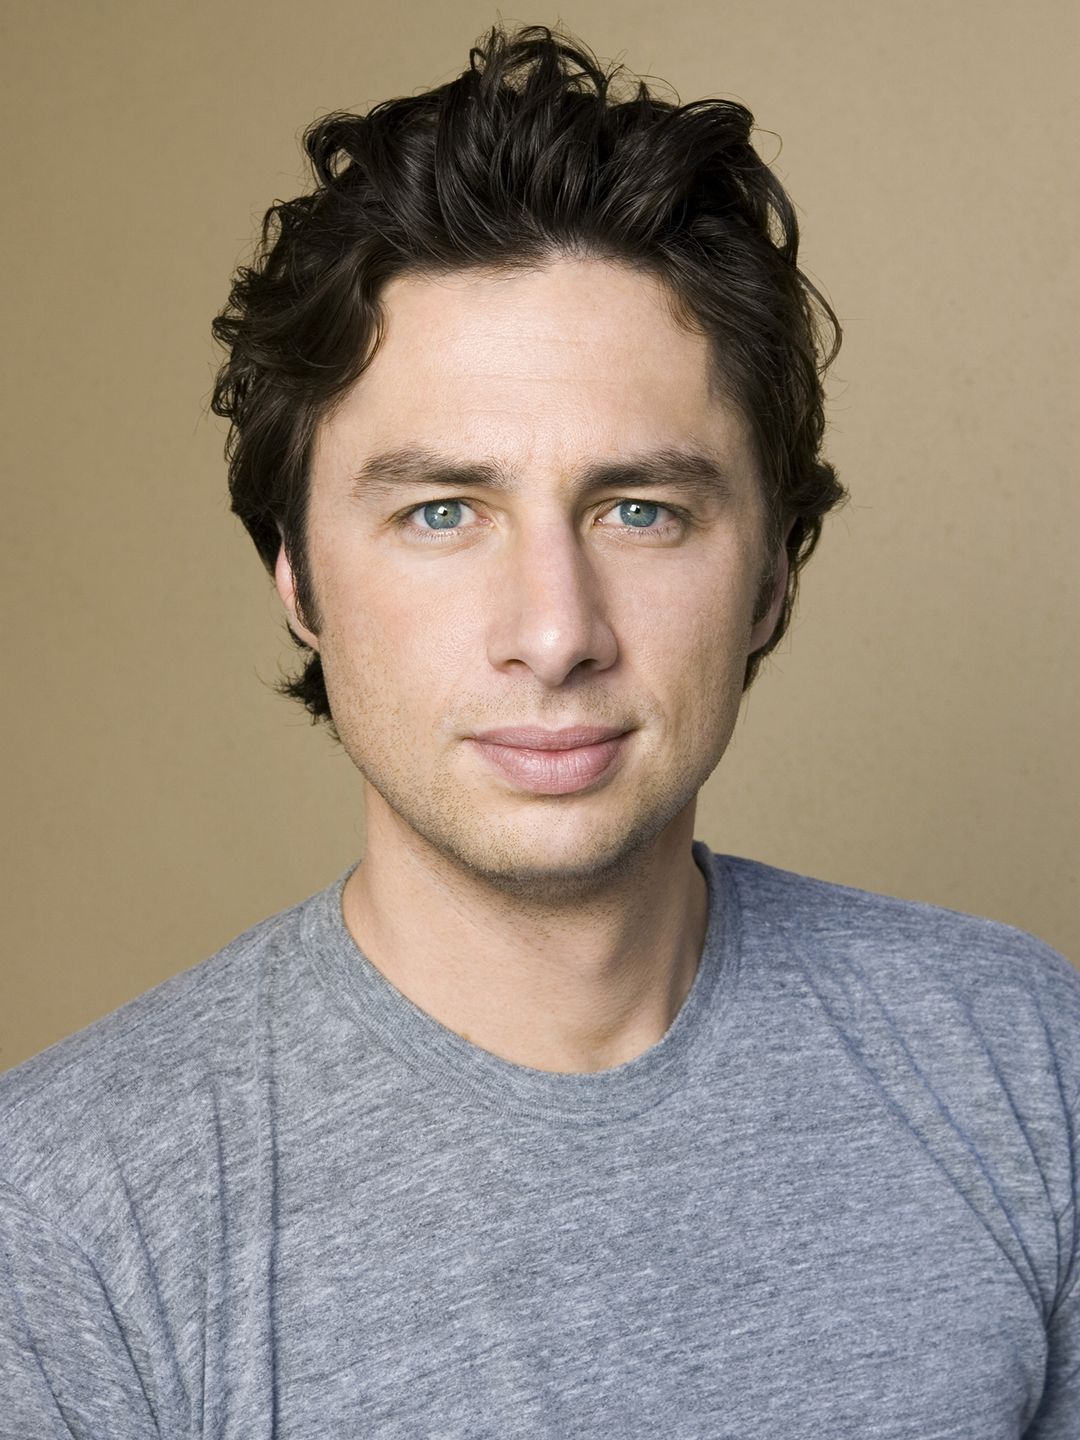 Zach Braff who is his mother